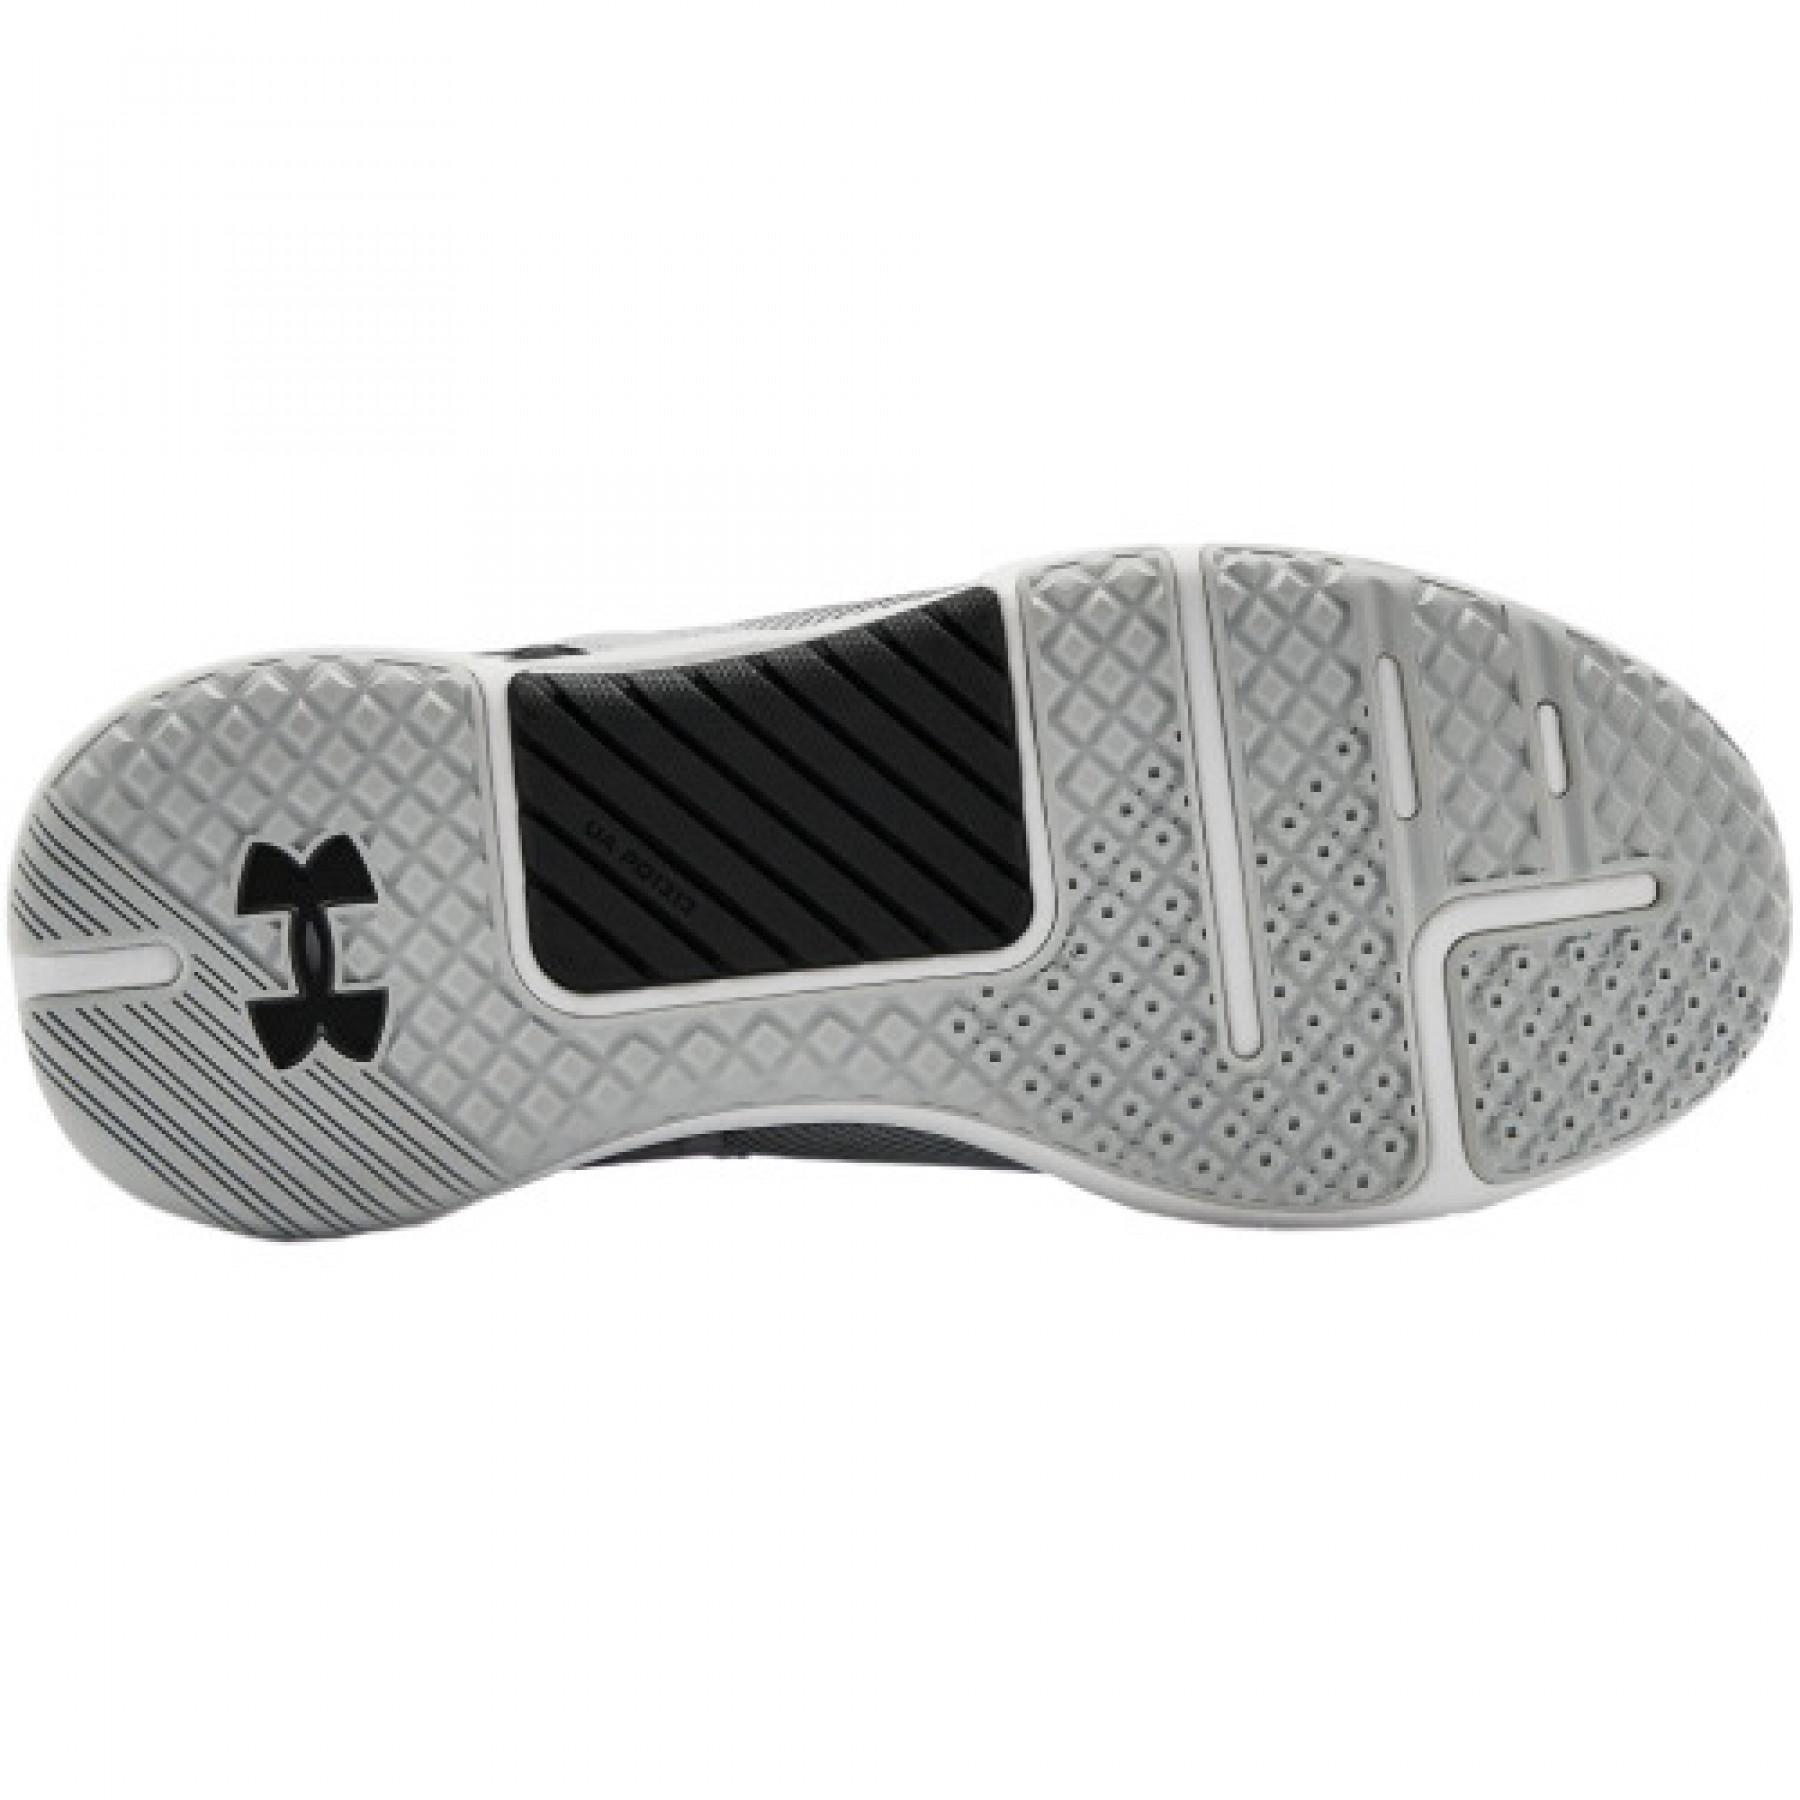 Chaussures femme Under Armour HOVR Rise 2 LUX